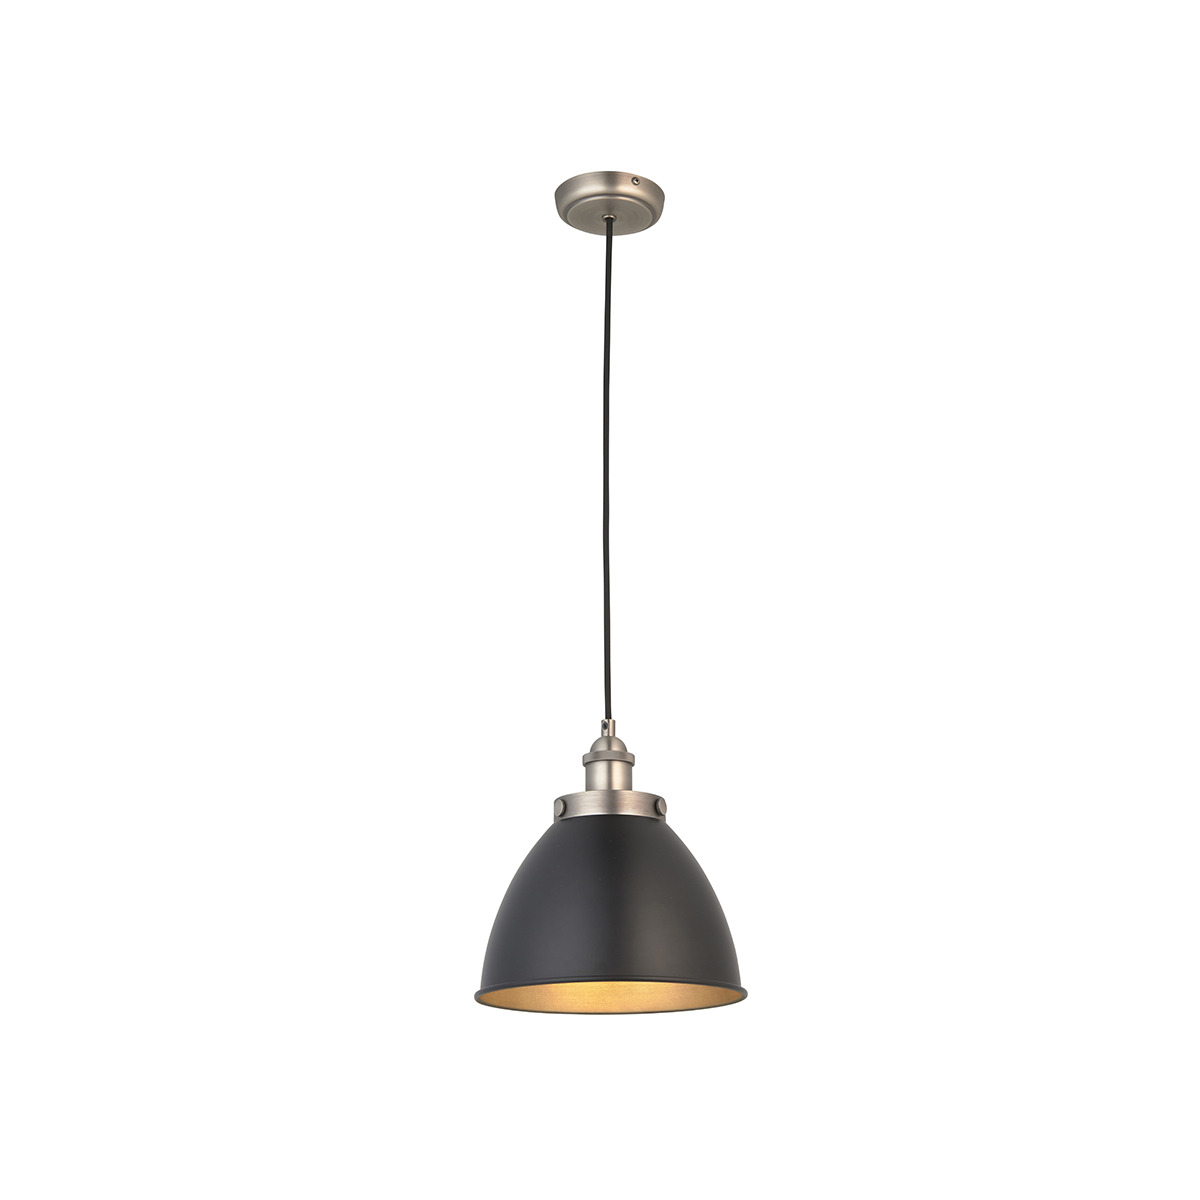 Fletcher Small Pendant in Aged Pewter and Matt Black